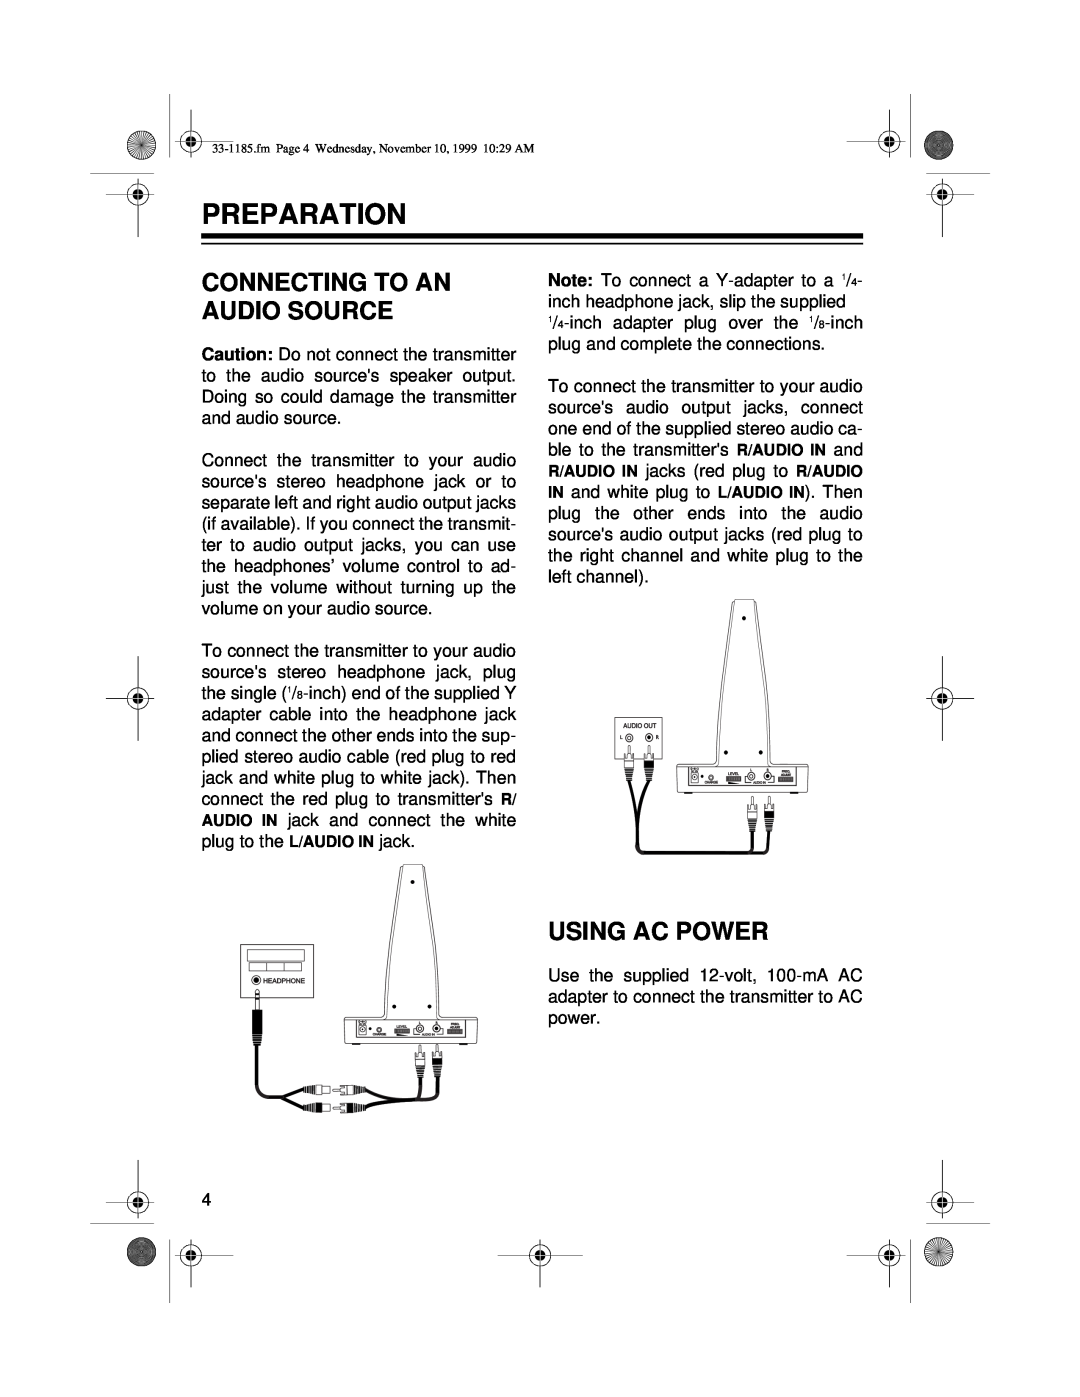 Radio Shack 33-1185 owner manual Preparation, Connecting To An Audio Source, Using Ac Power 